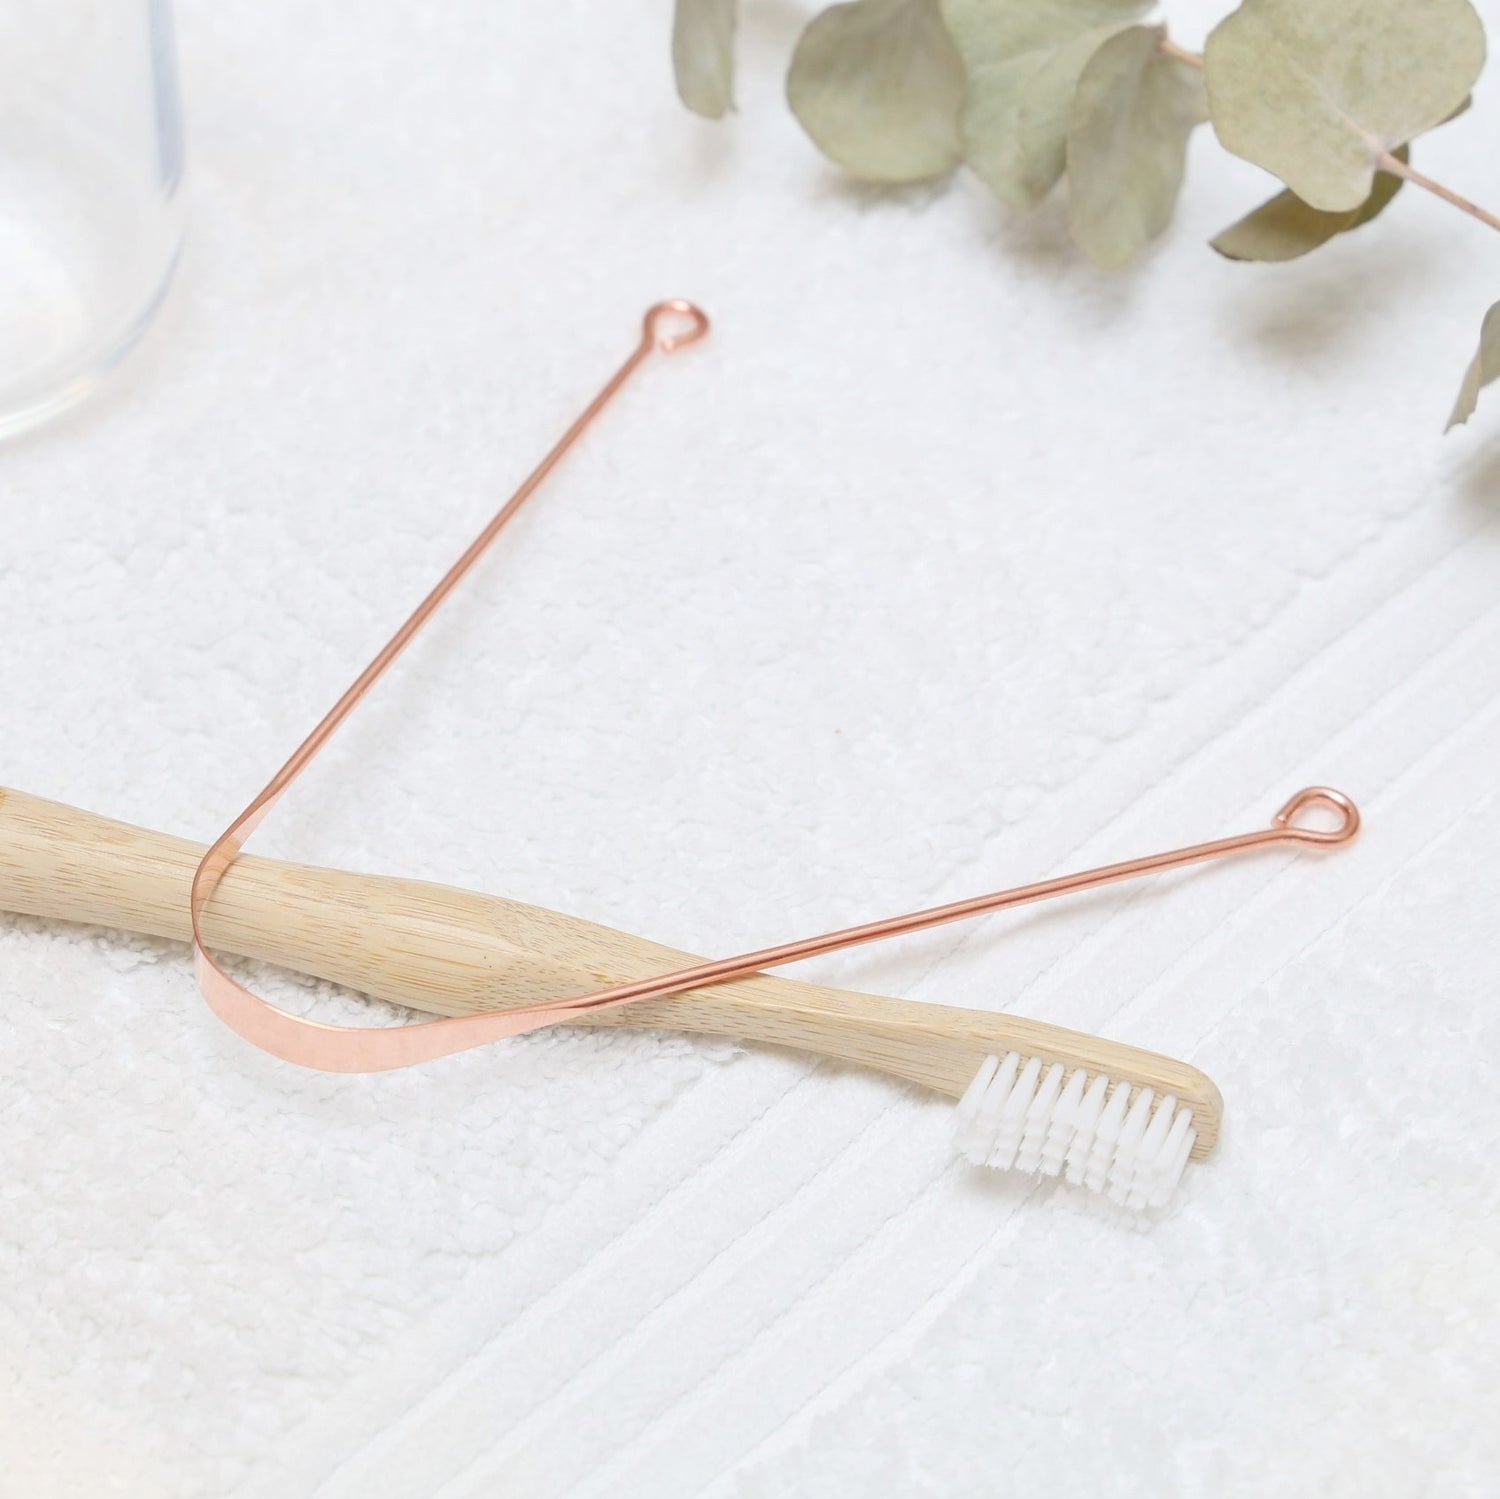 metal tongue cleaner made in copper on top of a bamboo toothbrush